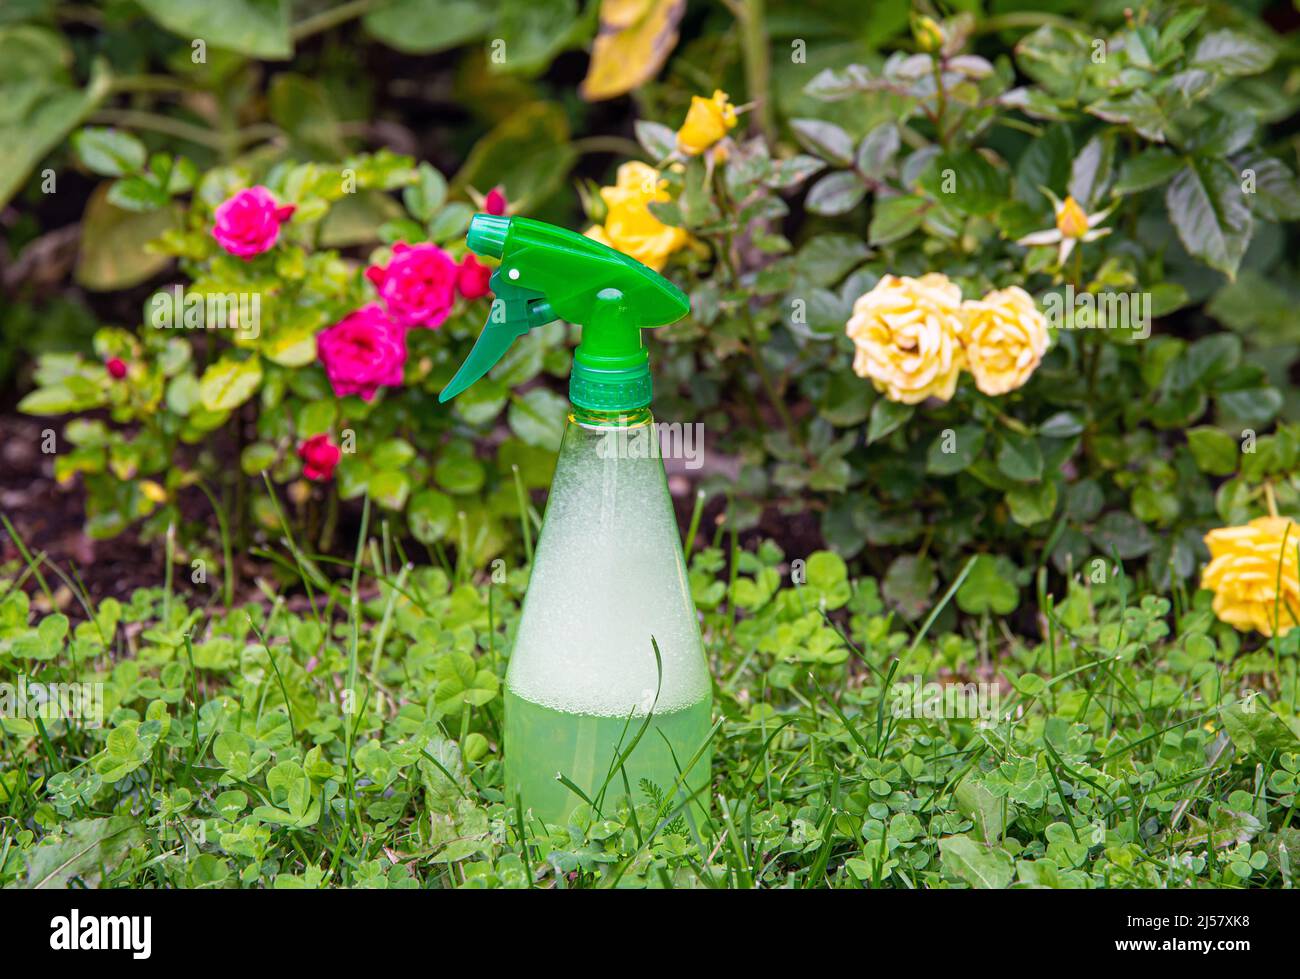 Using homemade insecticidal insect spray in home garden to protect roses from insects or fungus. Stock Photo